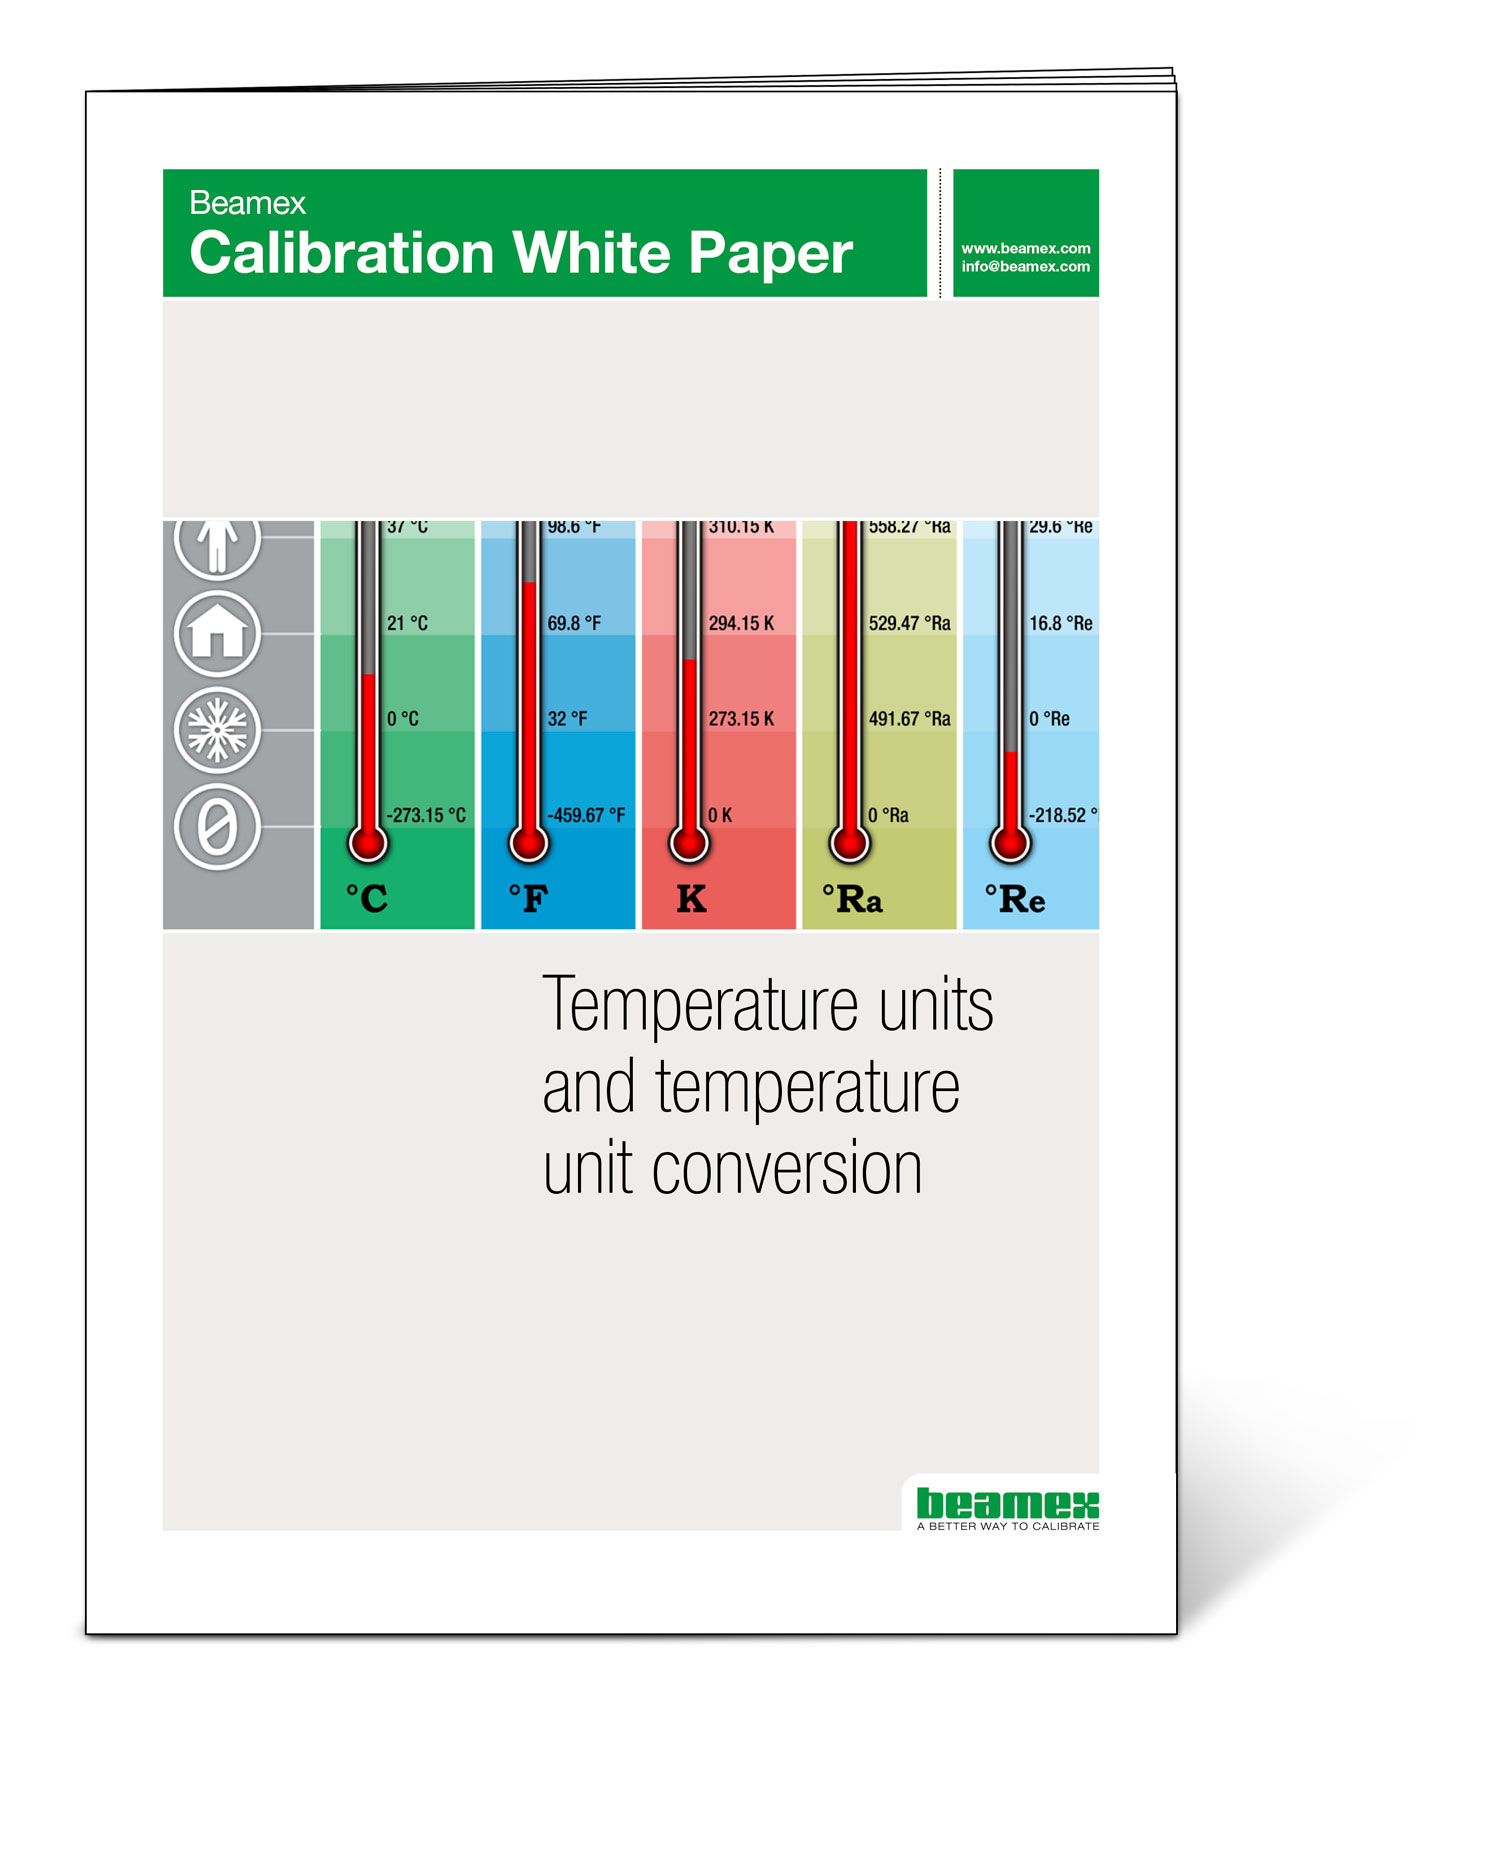 https://resources.beamex.com/hubfs/Beamex_White_Papers/Beamex-WP-Temperature-units-and-conversions-1500px-v1.jpg